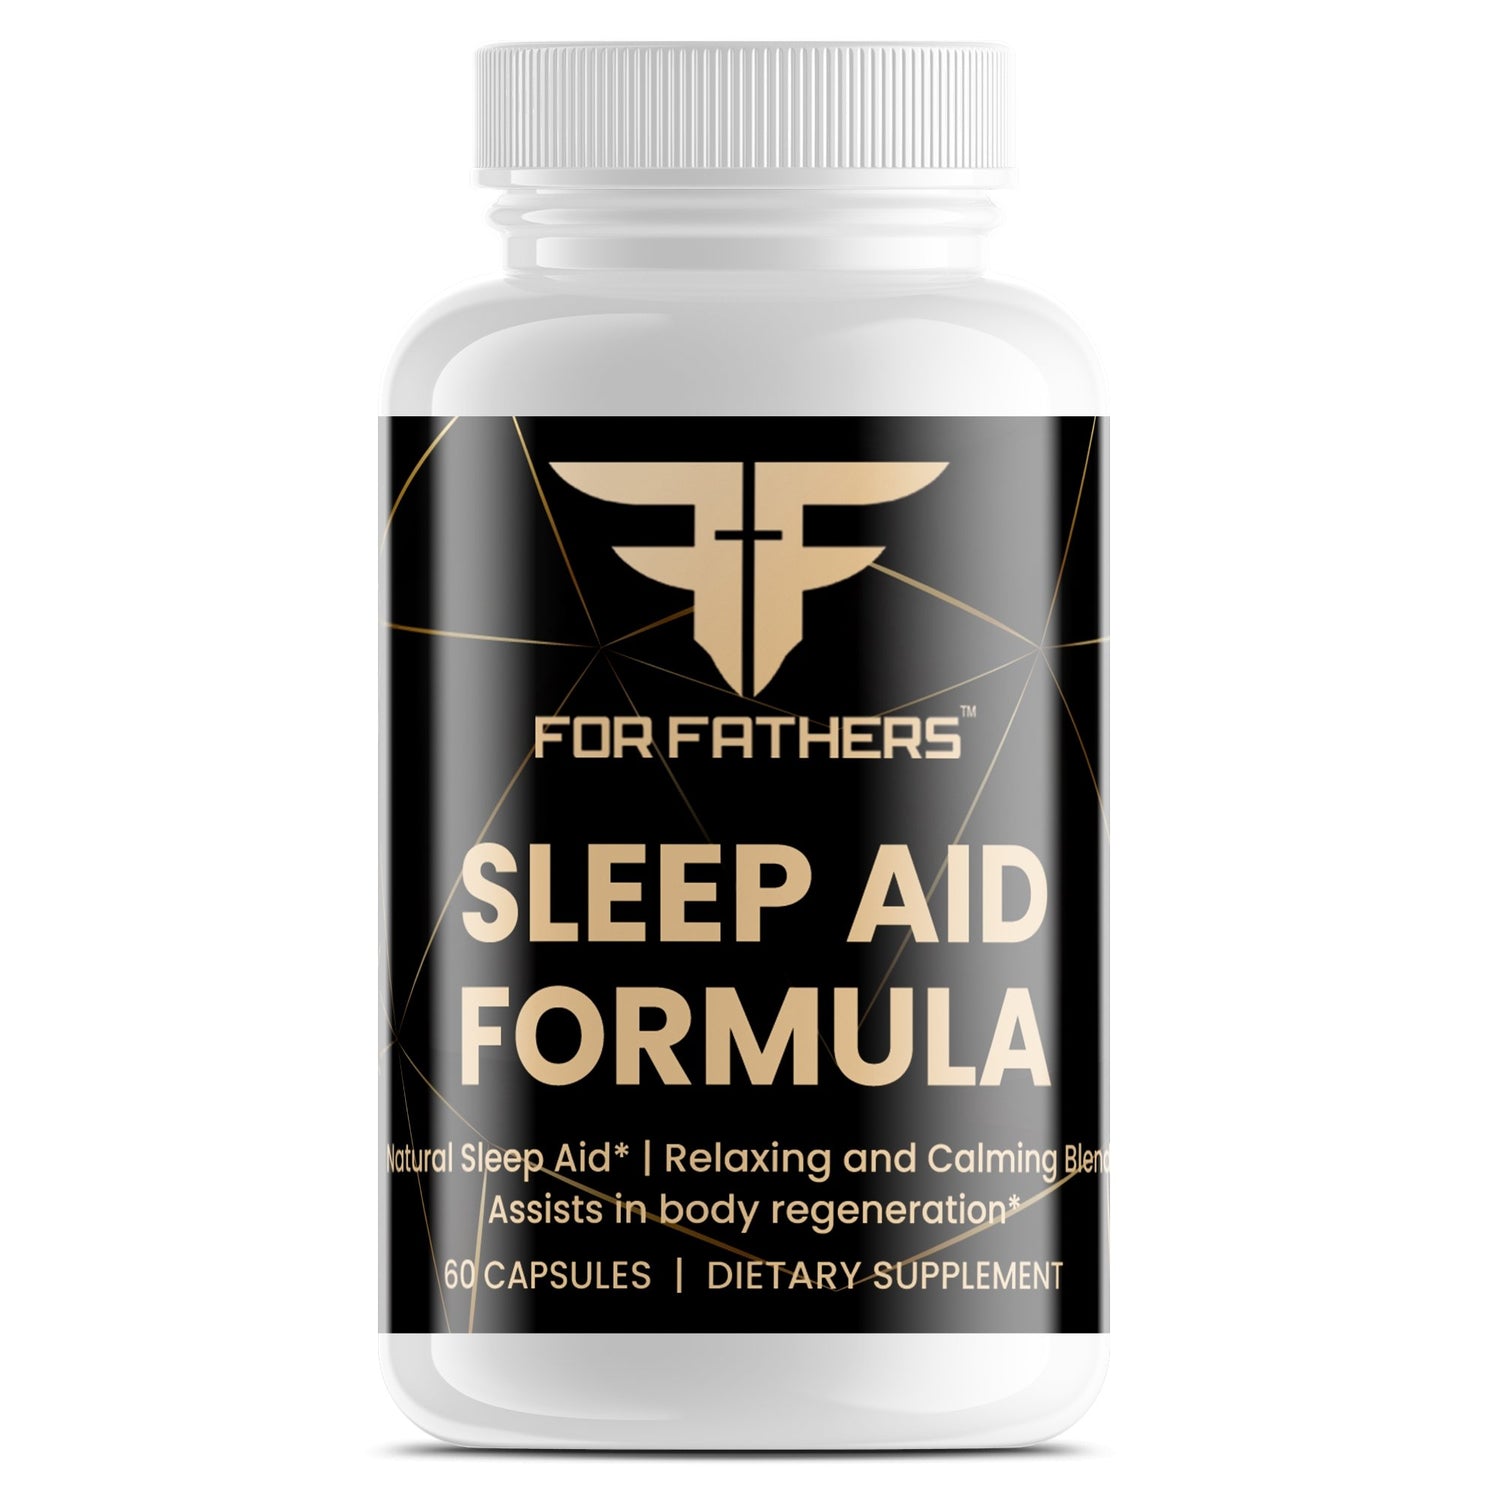 Natural Sleep Aid Formula for Restful Sleep - Non Habit Forming - For Fathers Fitness